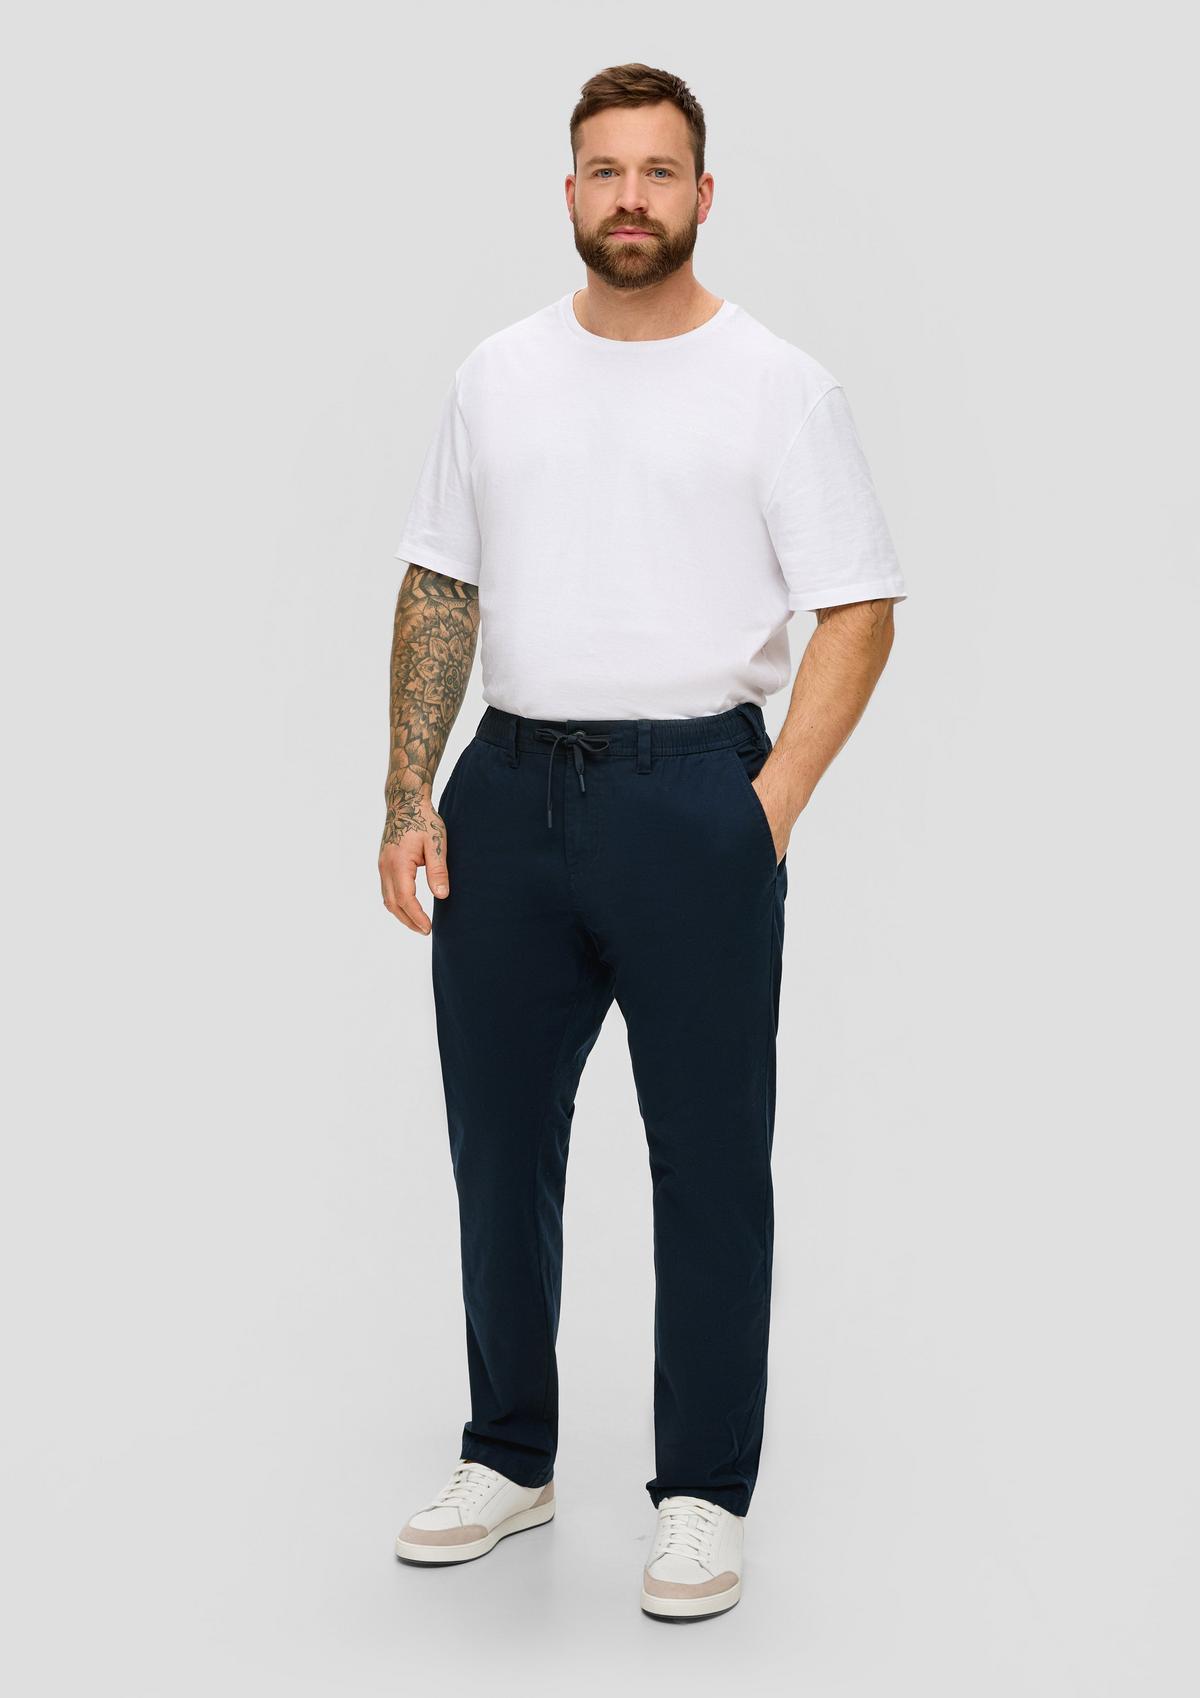 Men Trousers for Casual